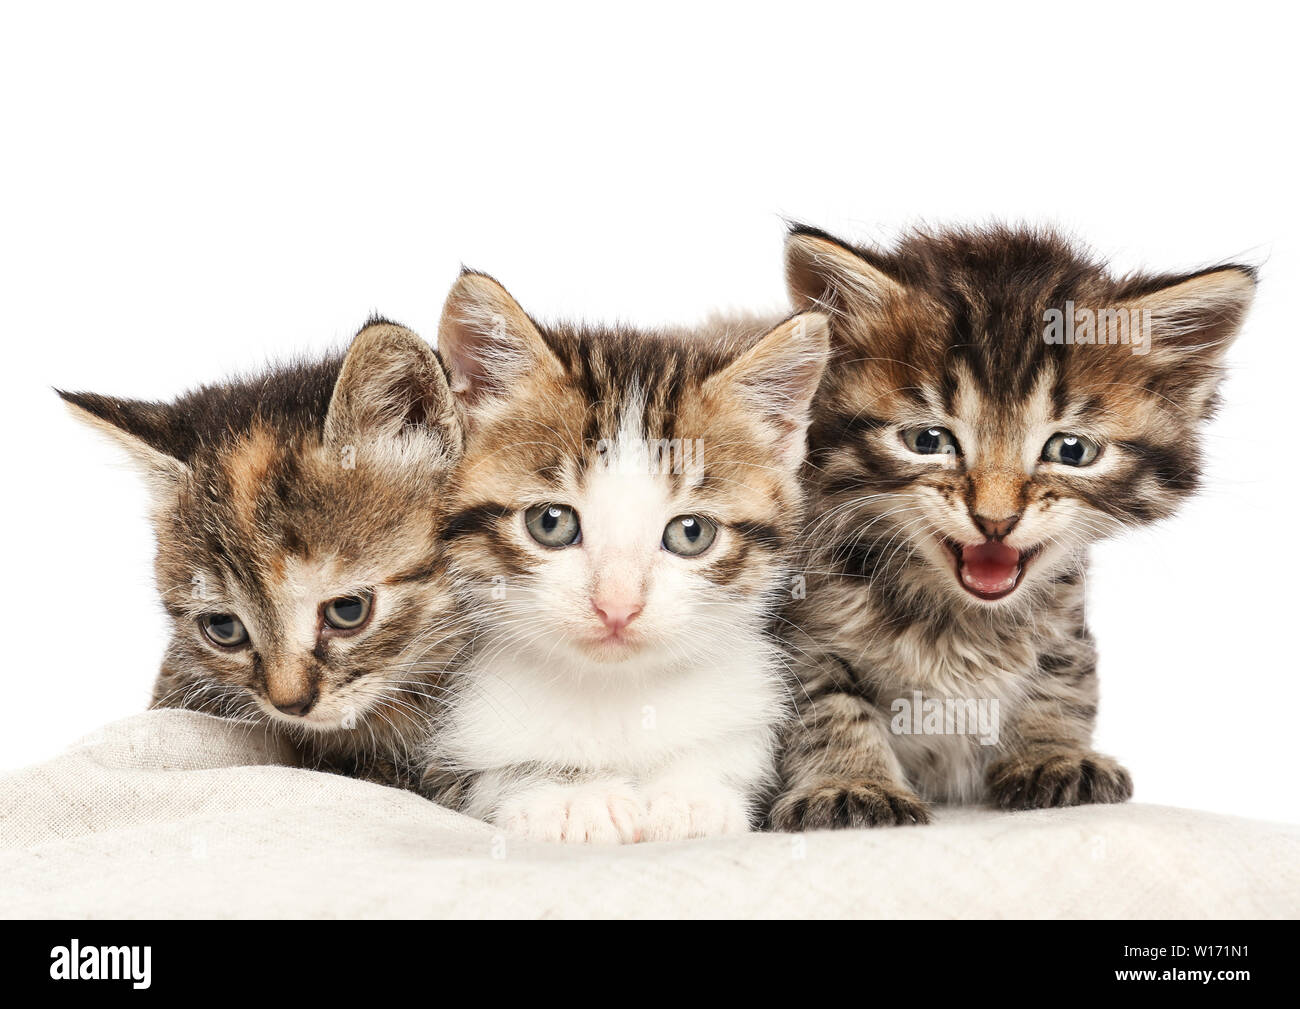 Cute funny kittens on white background Stock Photo - Alamy